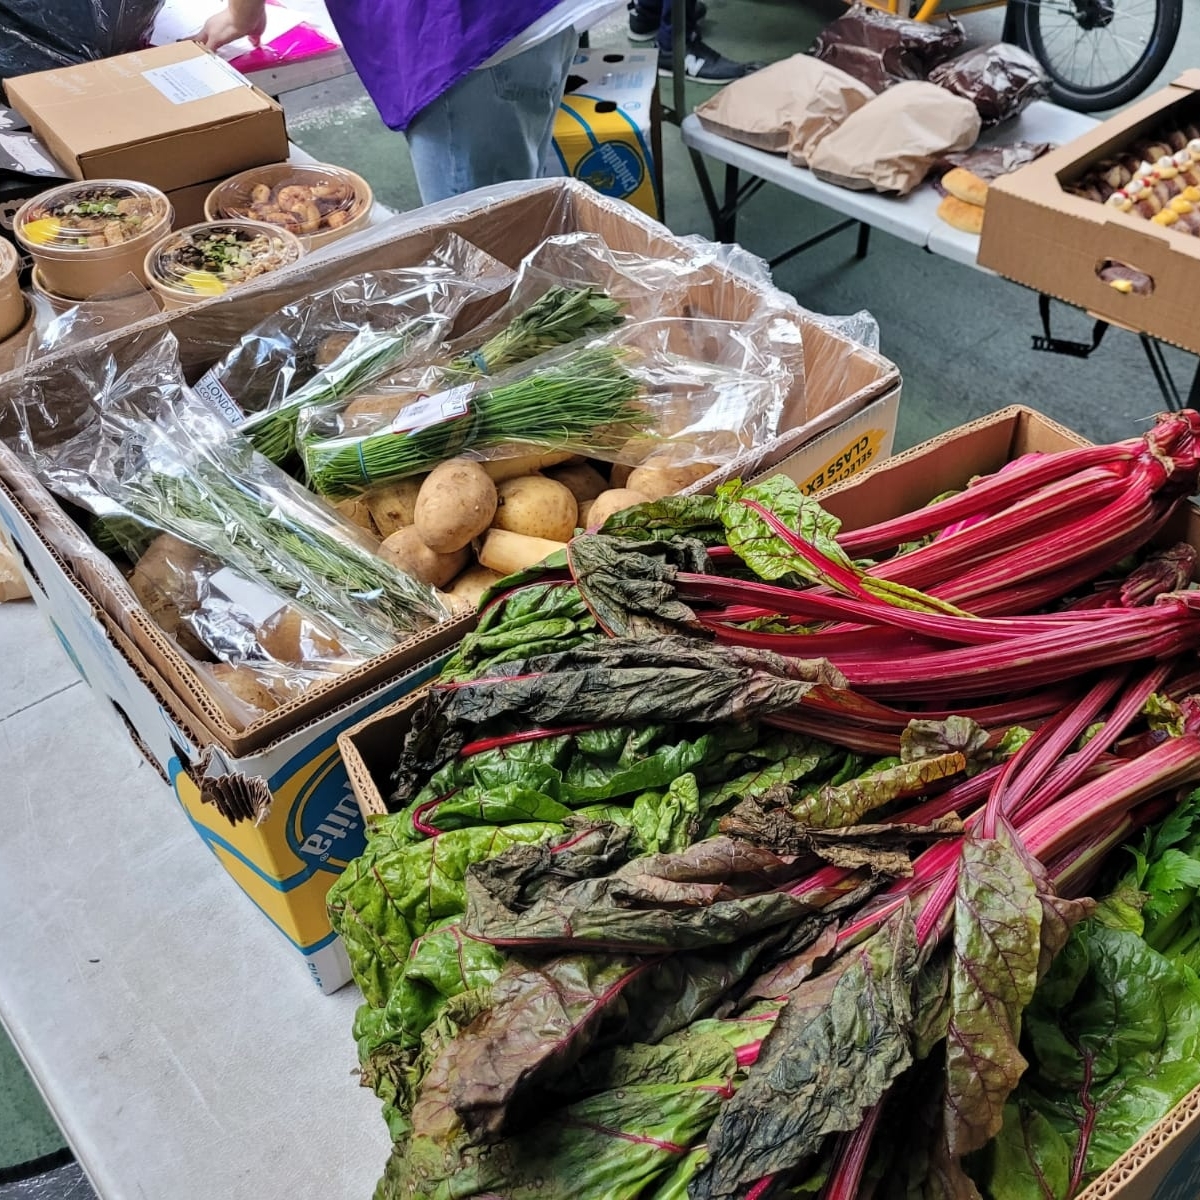 🥕 Are you a business with surplus food? 🍏 Would you like to donate it to charities? We can help! Our online platform allows you to register surplus food (type, quantity, location etc.) and charities can claim it and arrange to collect it from you. Email info@planzheroes.org.